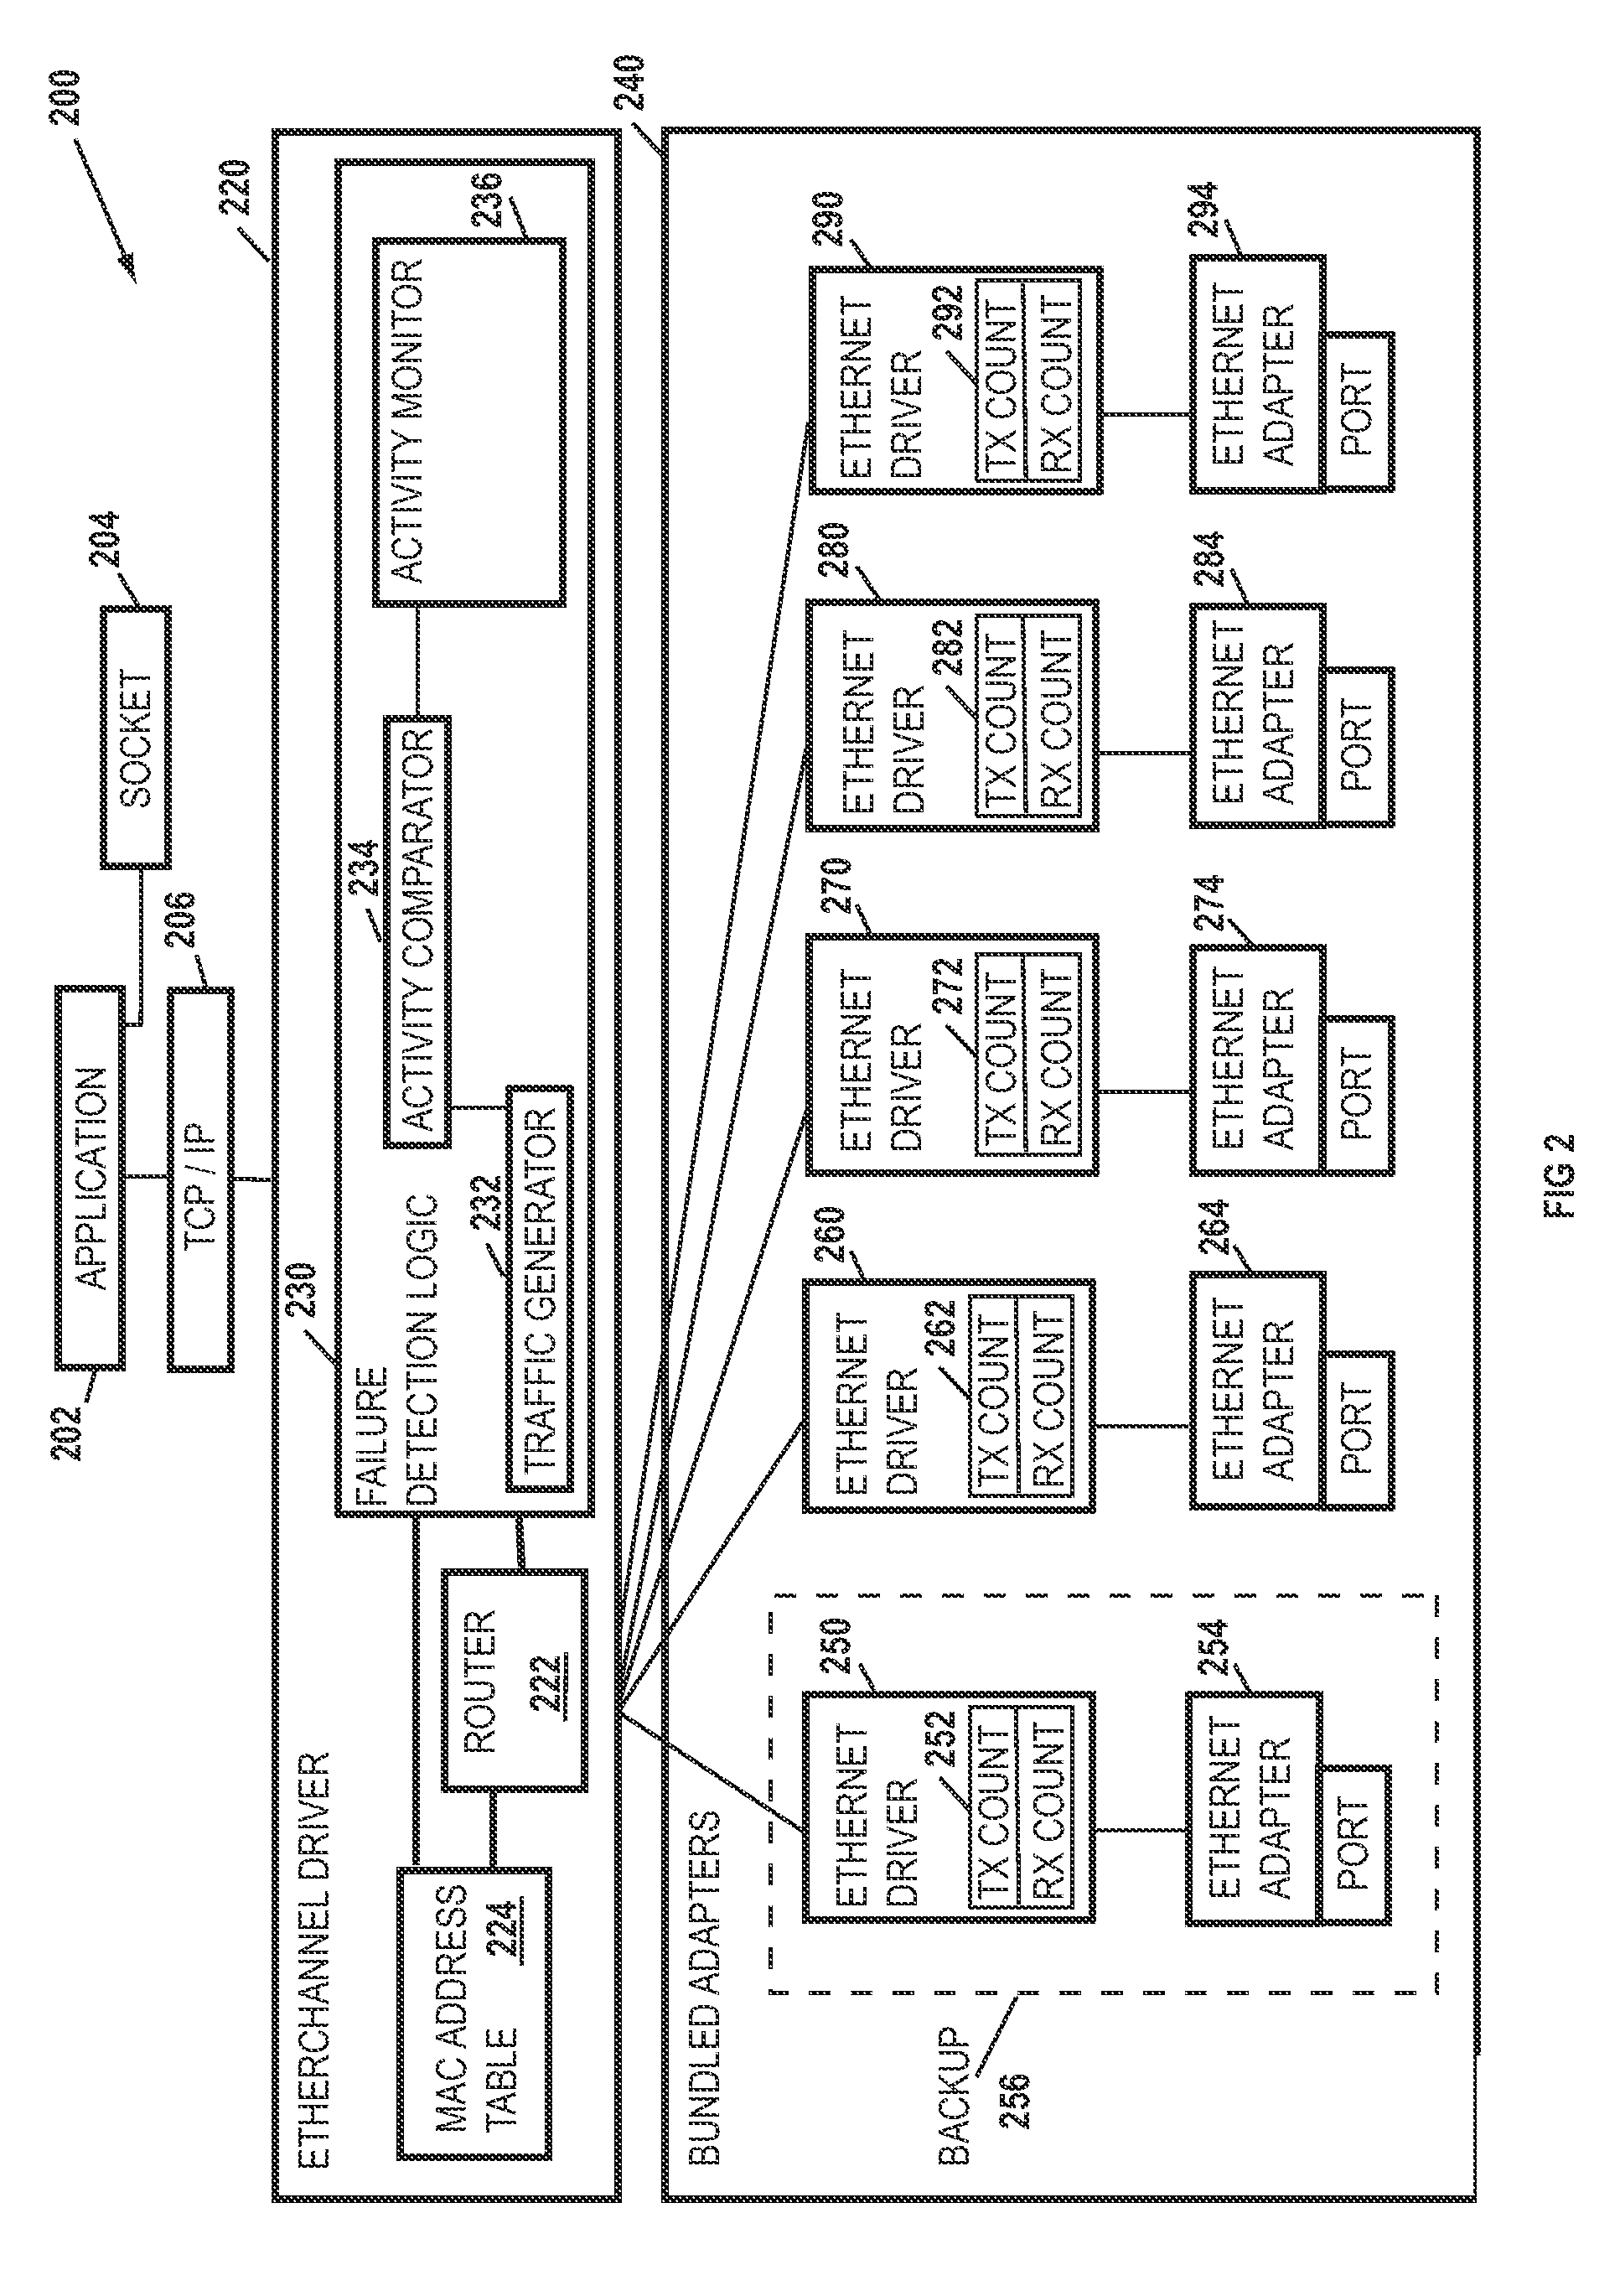 Methods and Arrangements to Detect a Failure in a Communication Network